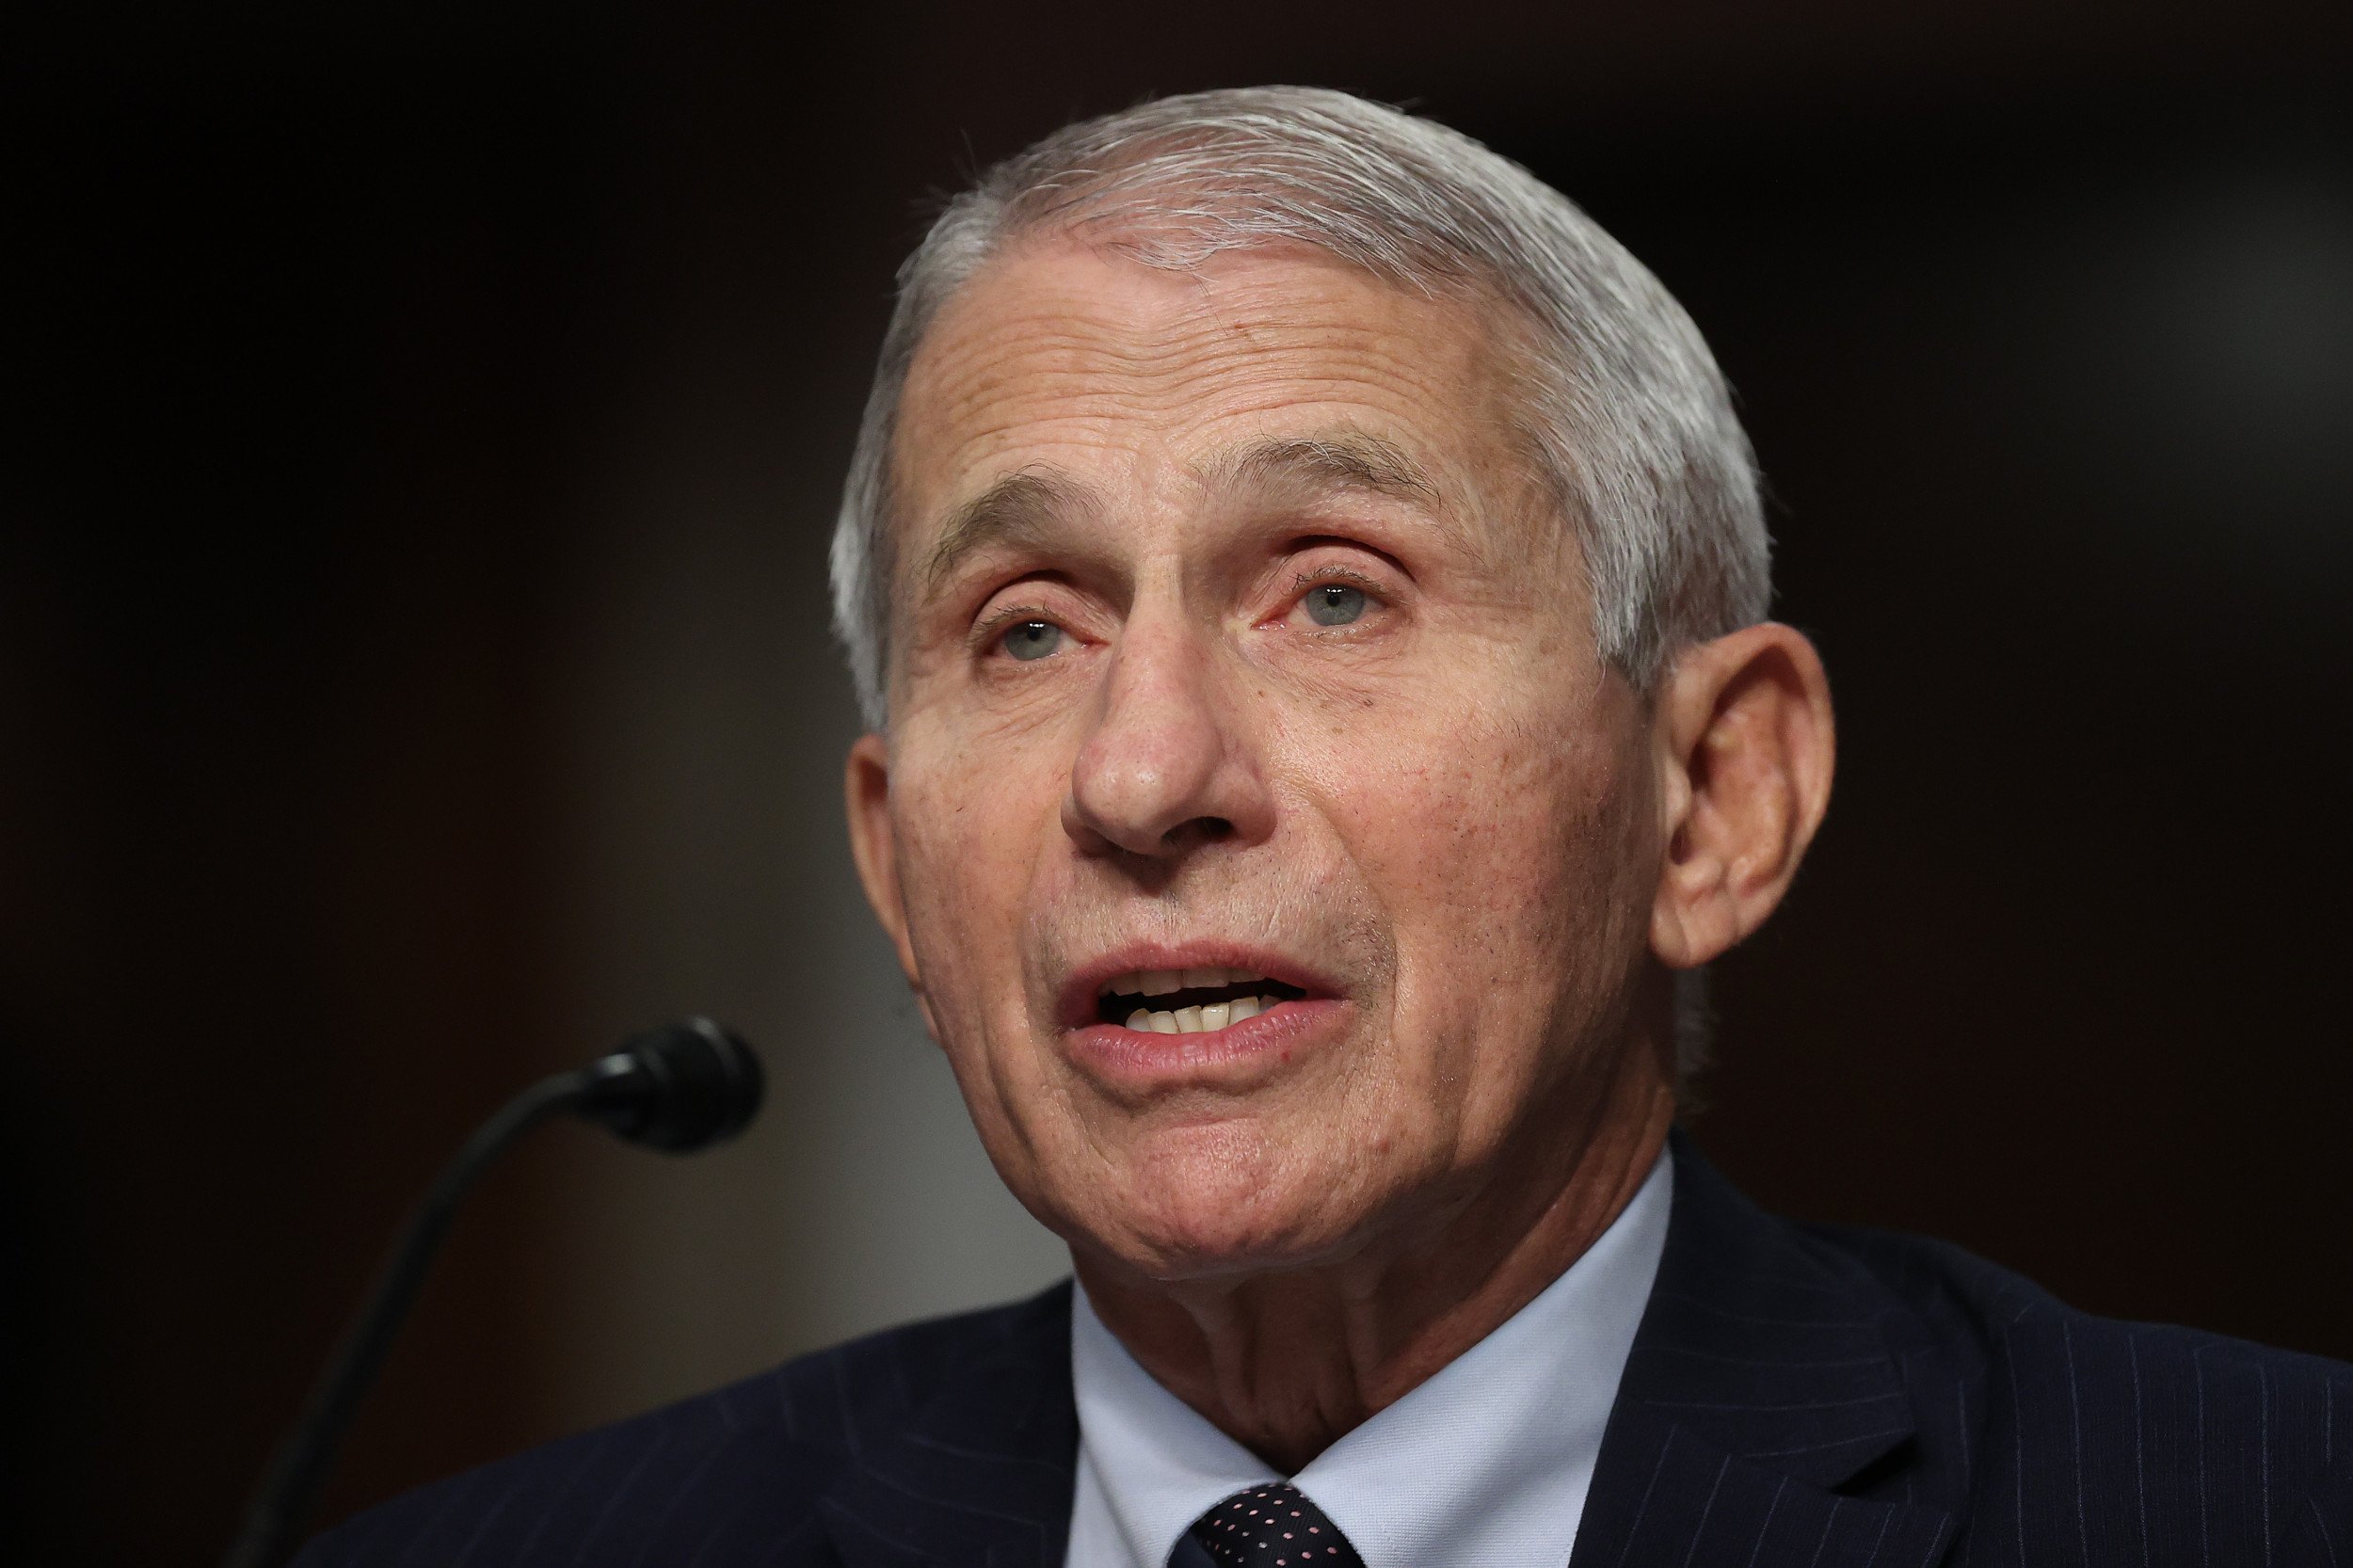 Dr. Fauci 3 Controversies Bidens Chief Medical Advisor Has Faced Since COVID-19 Began